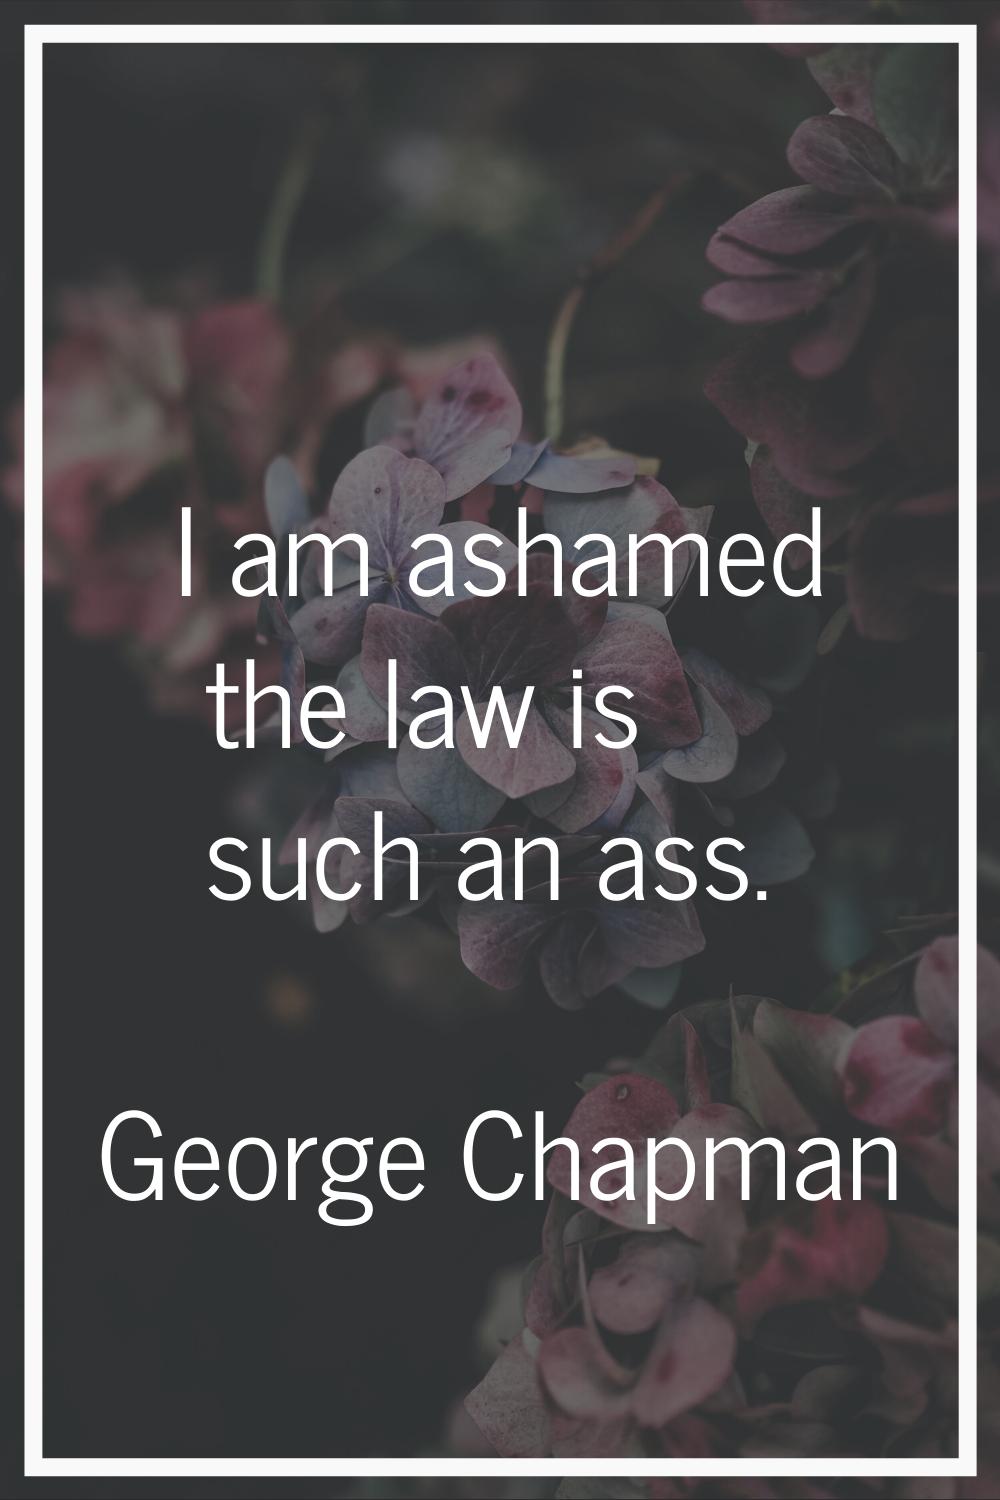 I am ashamed the law is such an ass.